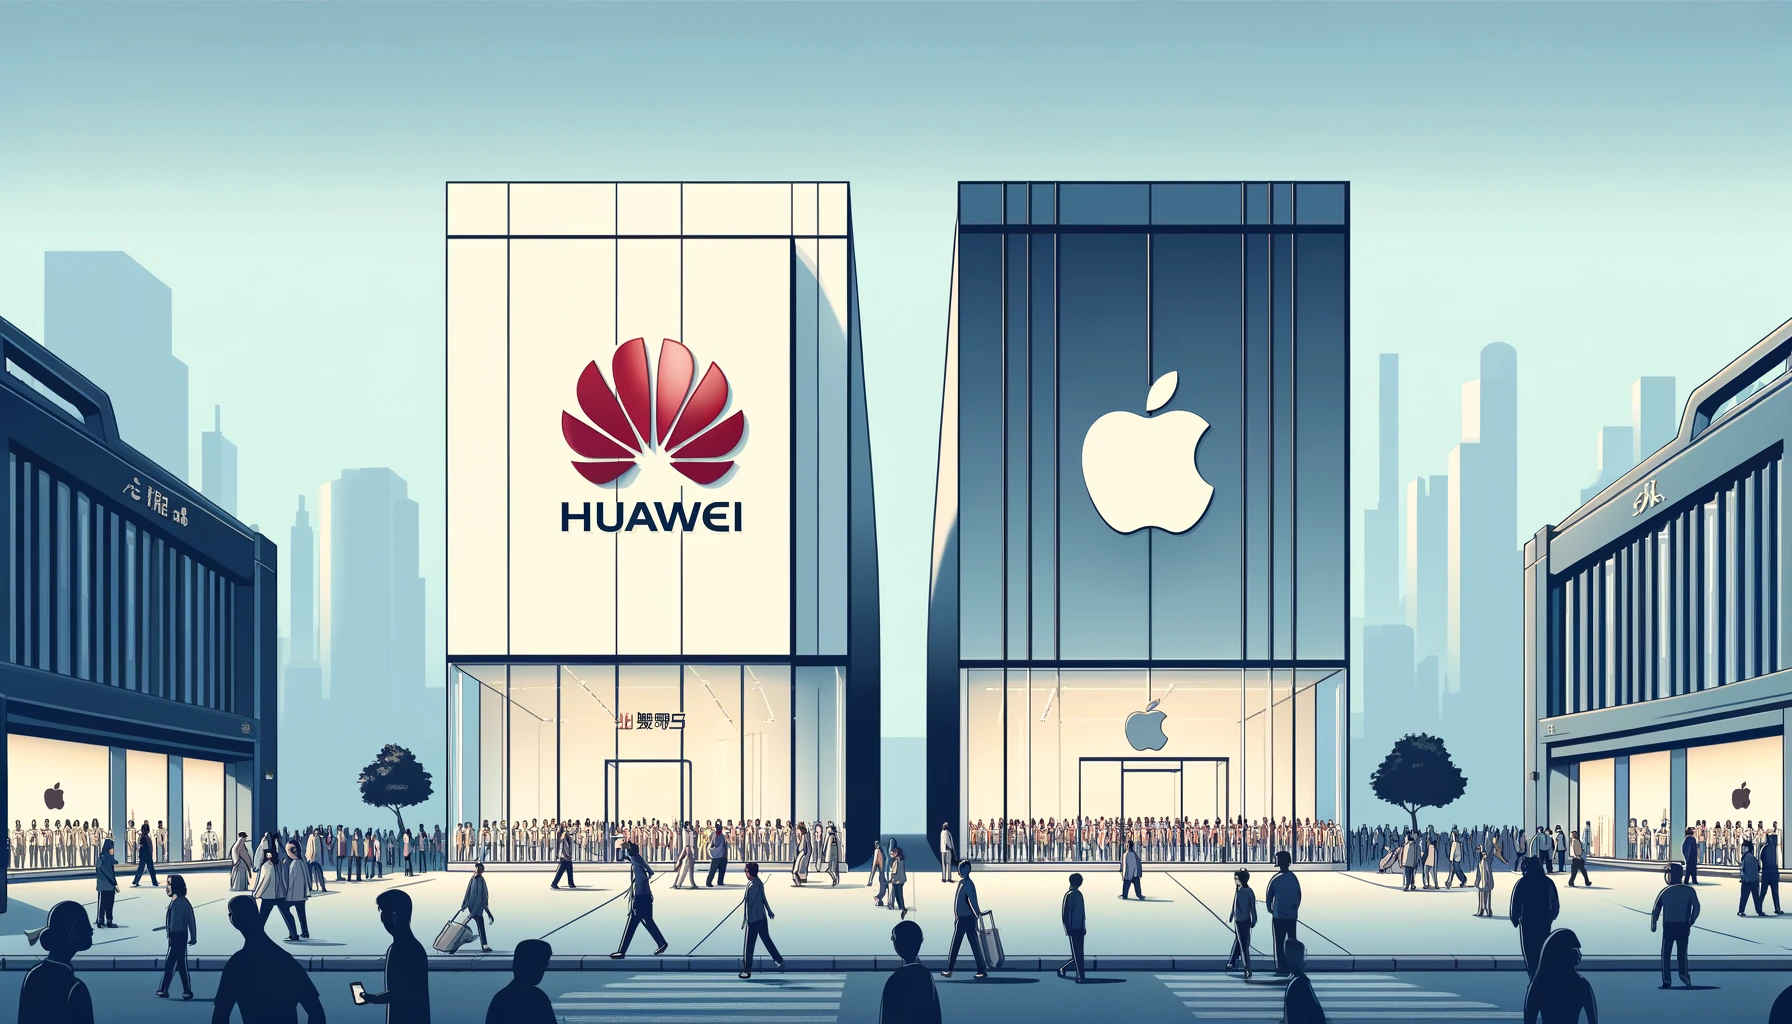 Huawei’s flagship store surge in China sets the stage for an interesting showdown with Apple